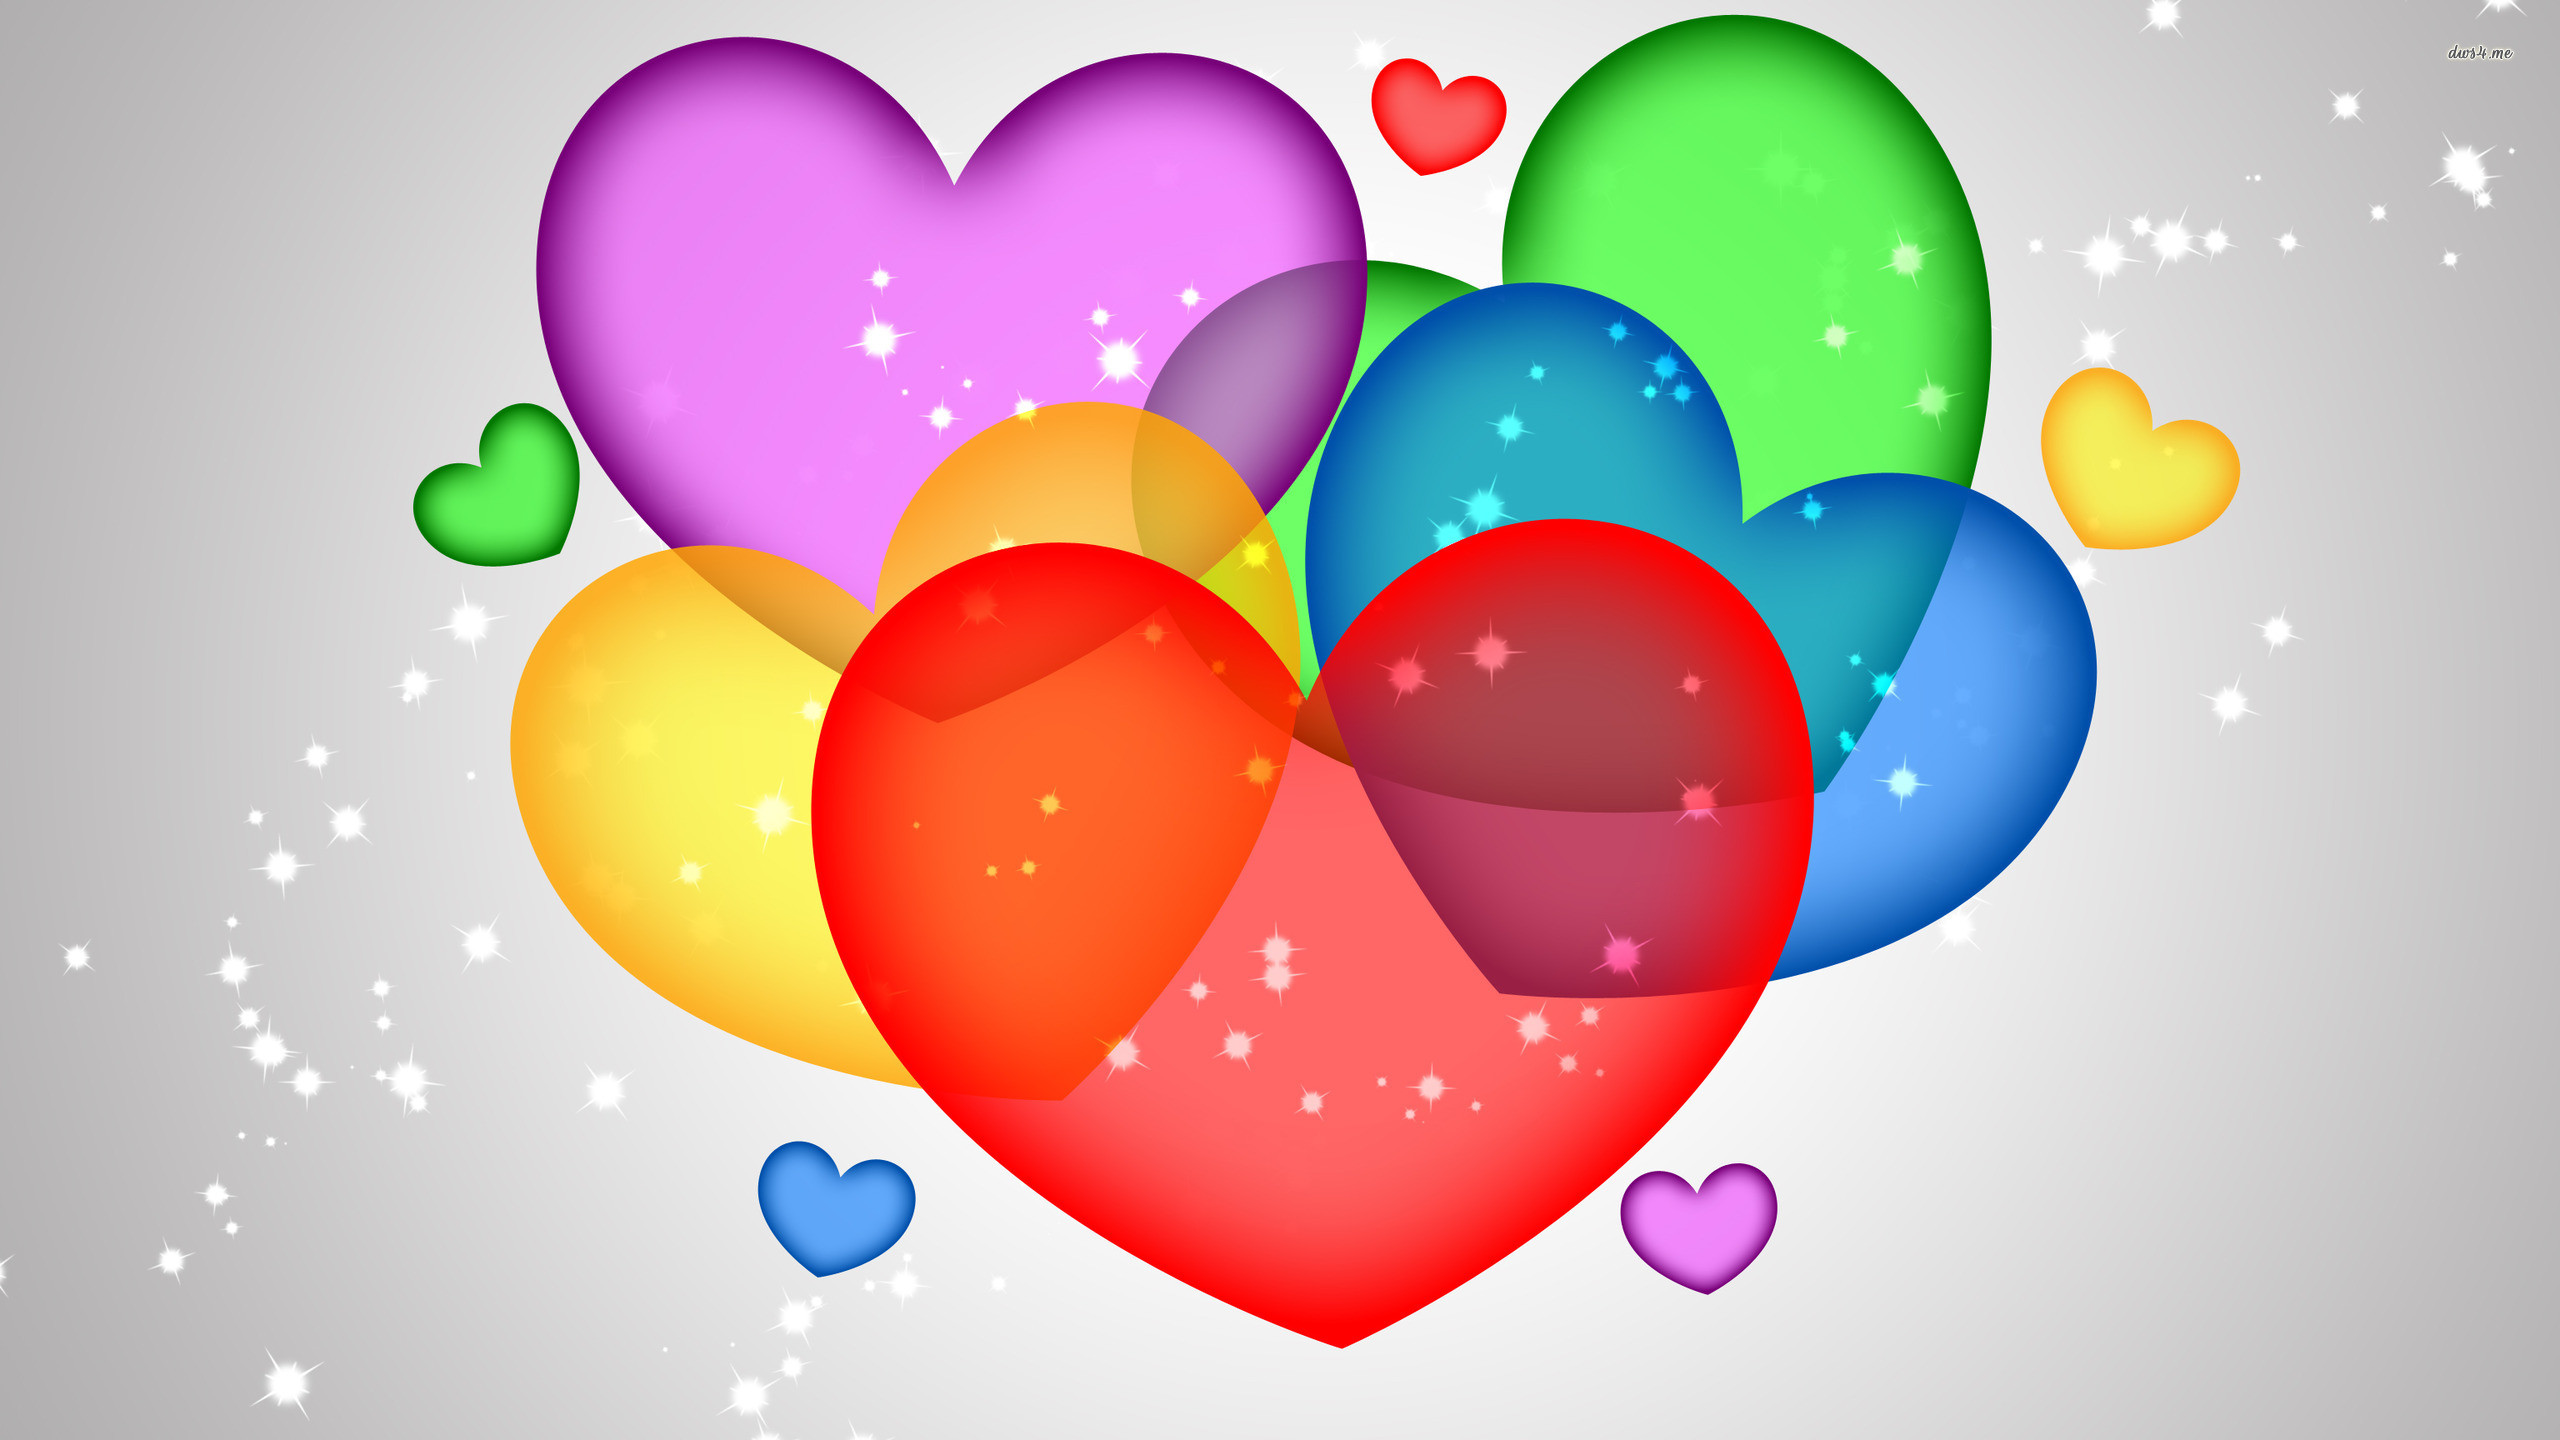 Colorful Hearts Wallpaper Download 2560x1440